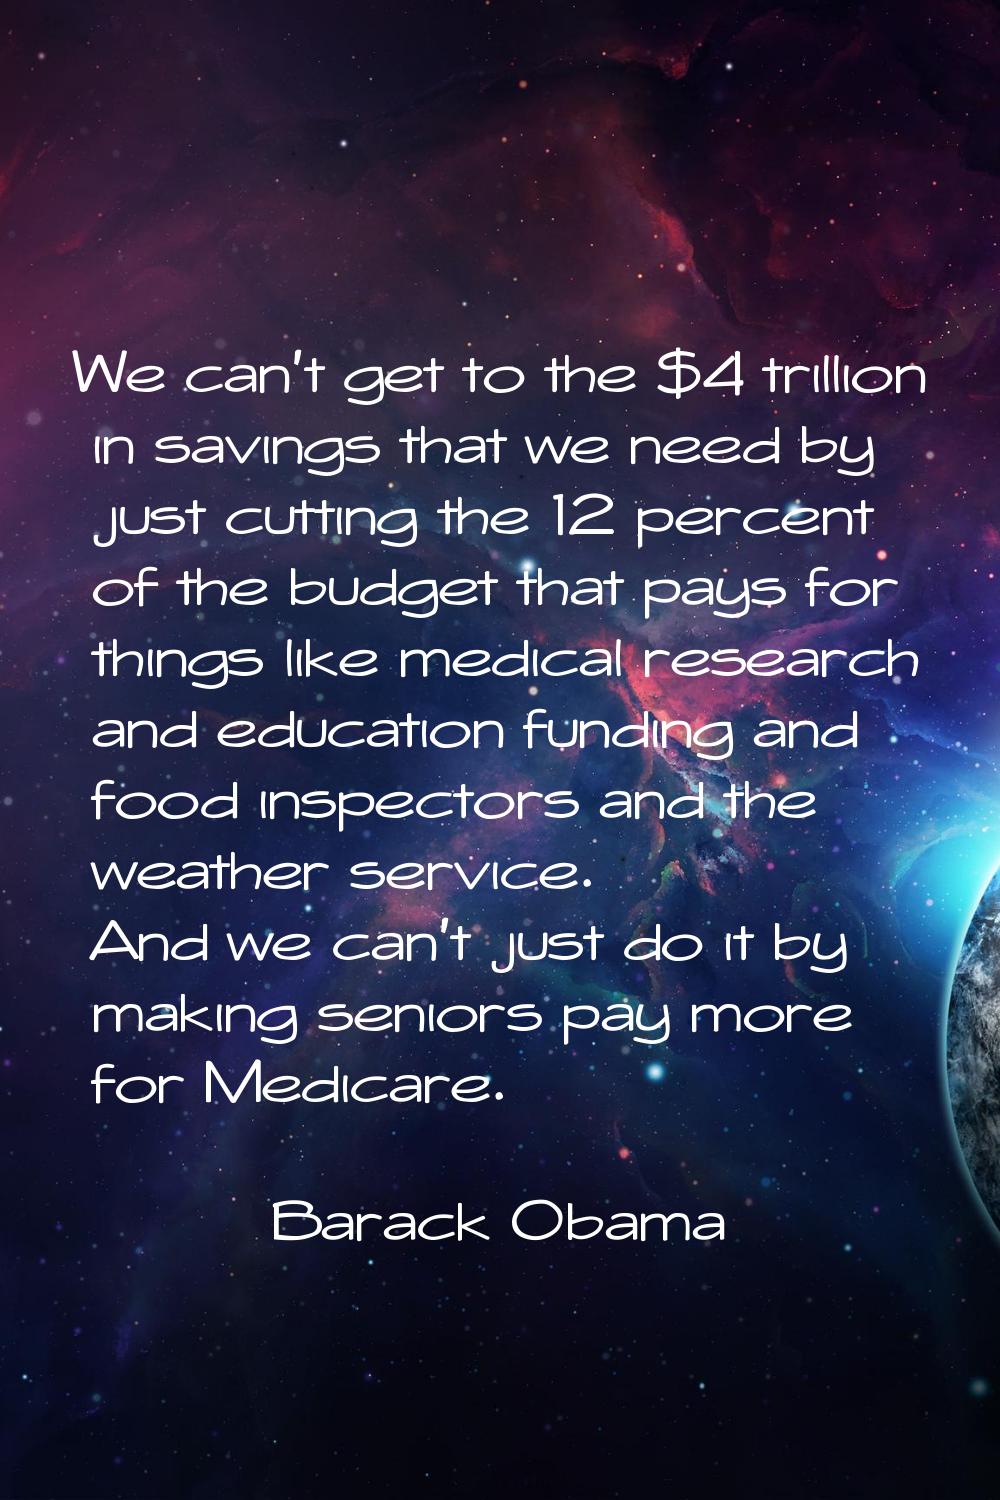 We can't get to the $4 trillion in savings that we need by just cutting the 12 percent of the budge